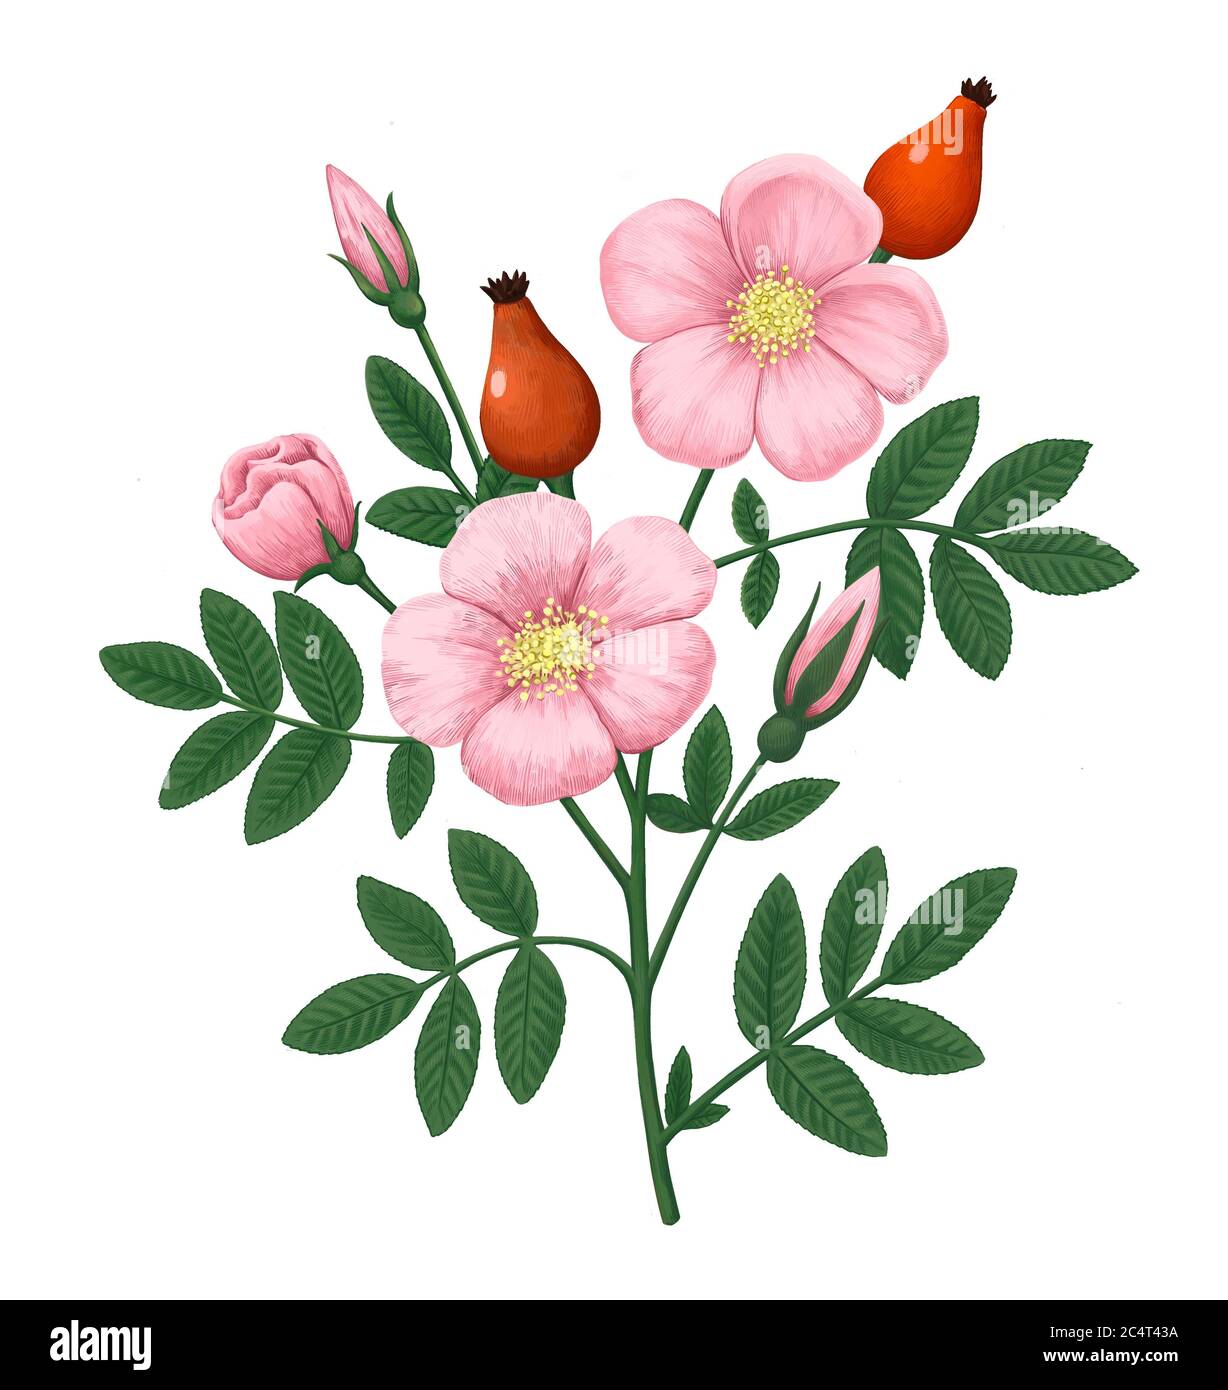 Vintage botanical illustration with dog-rose flowers, berries, buds and leaves isolated on white background. Stock Photo